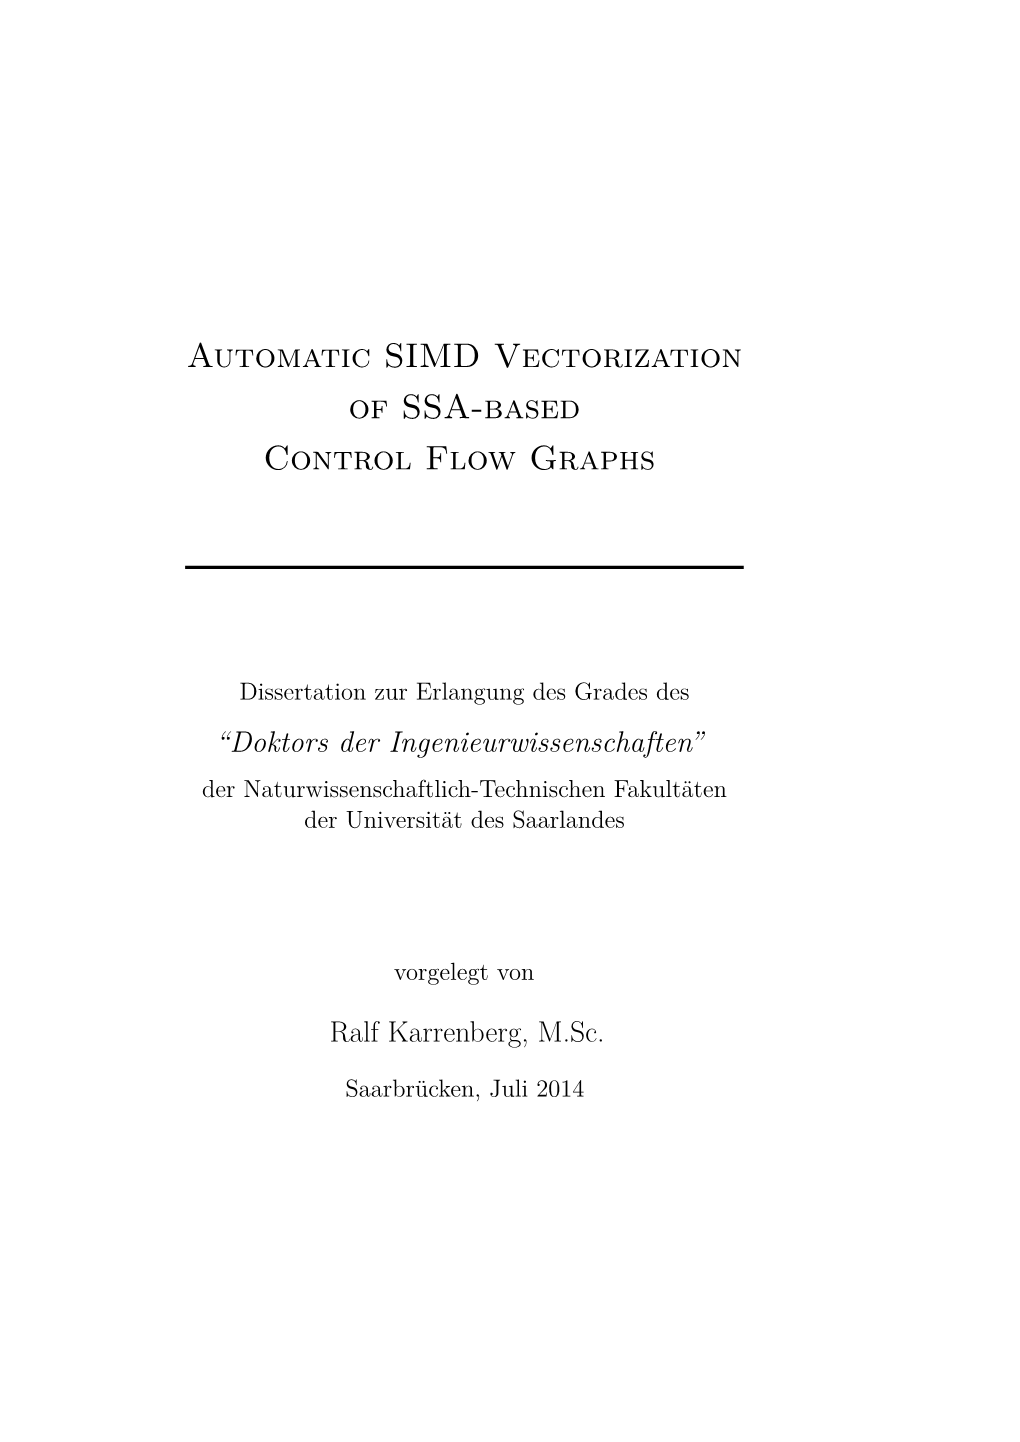 Automatic SIMD Vectorization of SSA-Based Control Flow Graphs